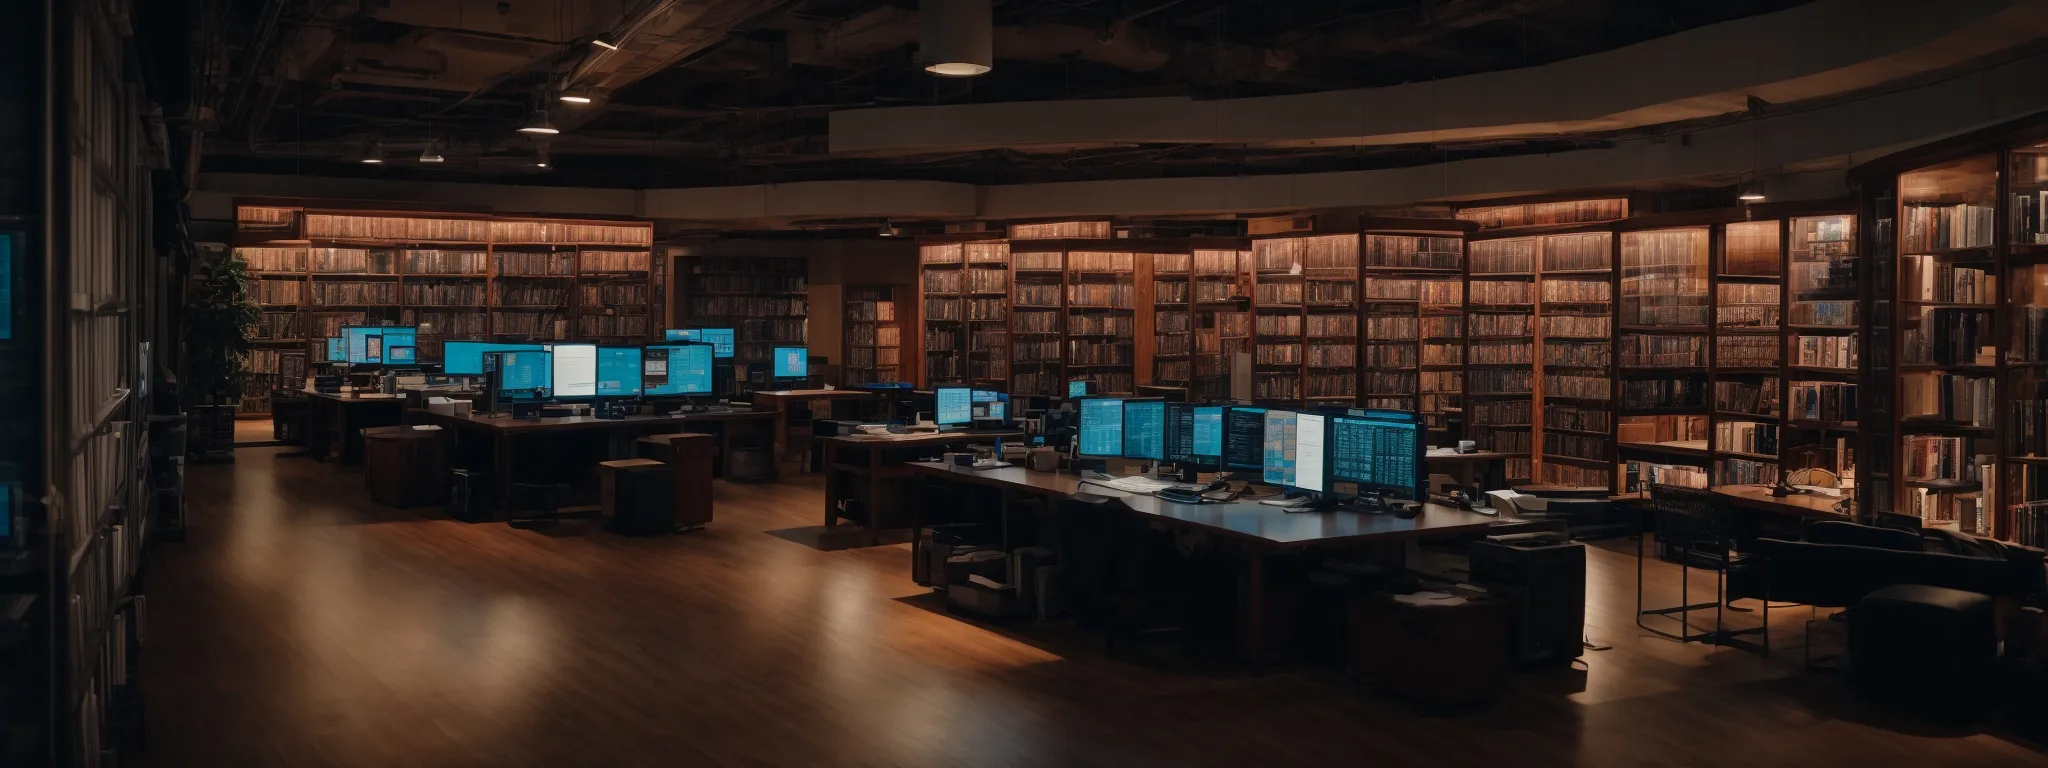 a panoramic view of a dimly lit library with an array of computer screens showing colorful graphs and data analytics.